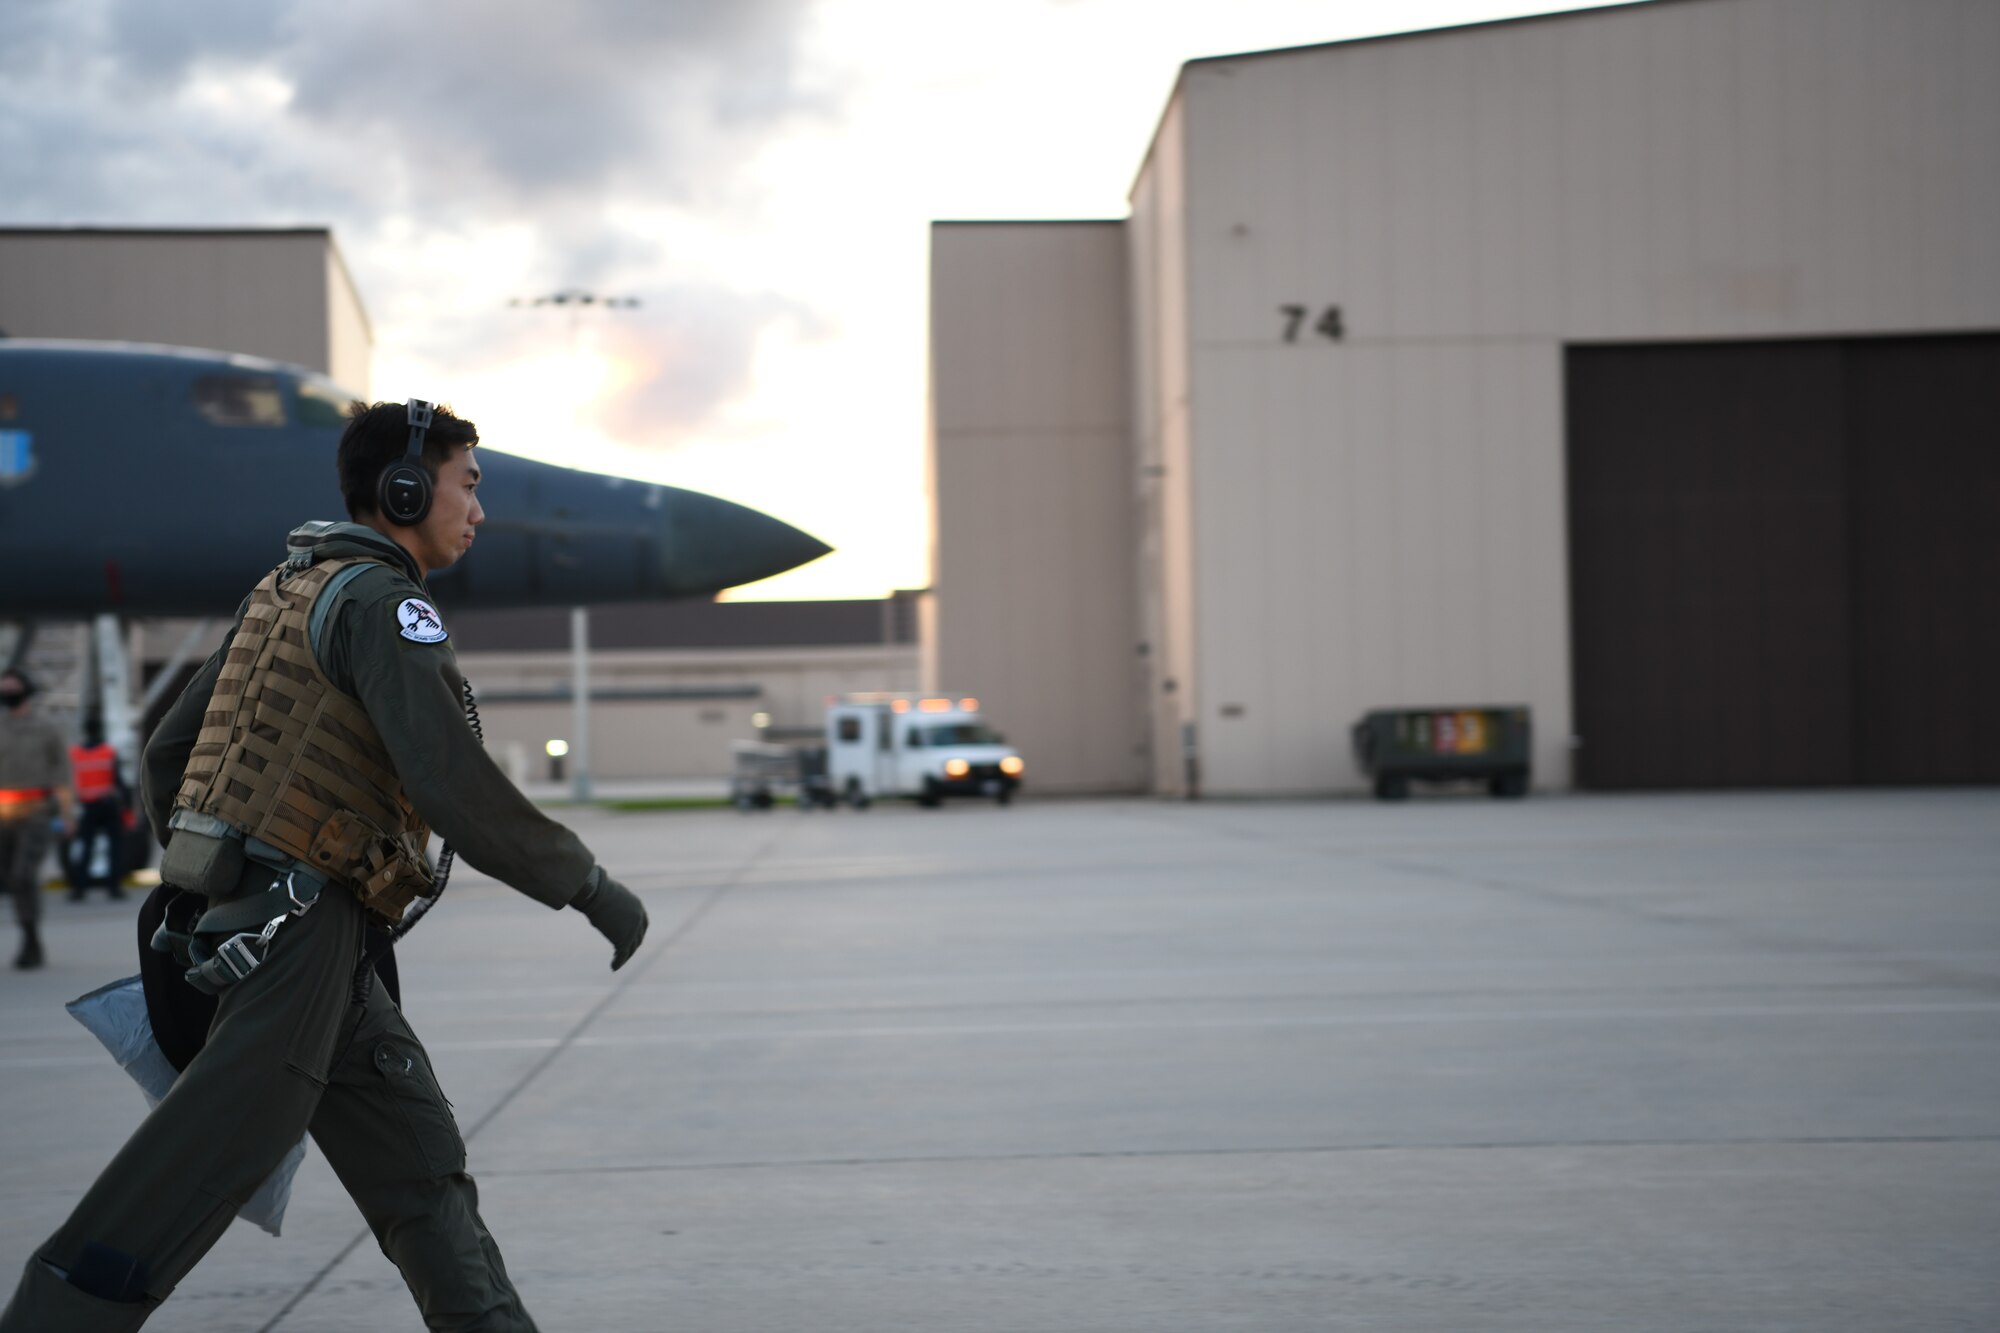 An aviator assigned to the 34th Bomb Squadron, Ellsworth Air Force Base, S.D., heads to the squadron following a more than 25-hour non-stop mission May 5, 2020. Bomber deployments and operations enhance the readiness and training necessary to respond to any contingency or challenge across the globe. (U.S. Air Force photo by Senior Airman Nicolas Z. Erwin)